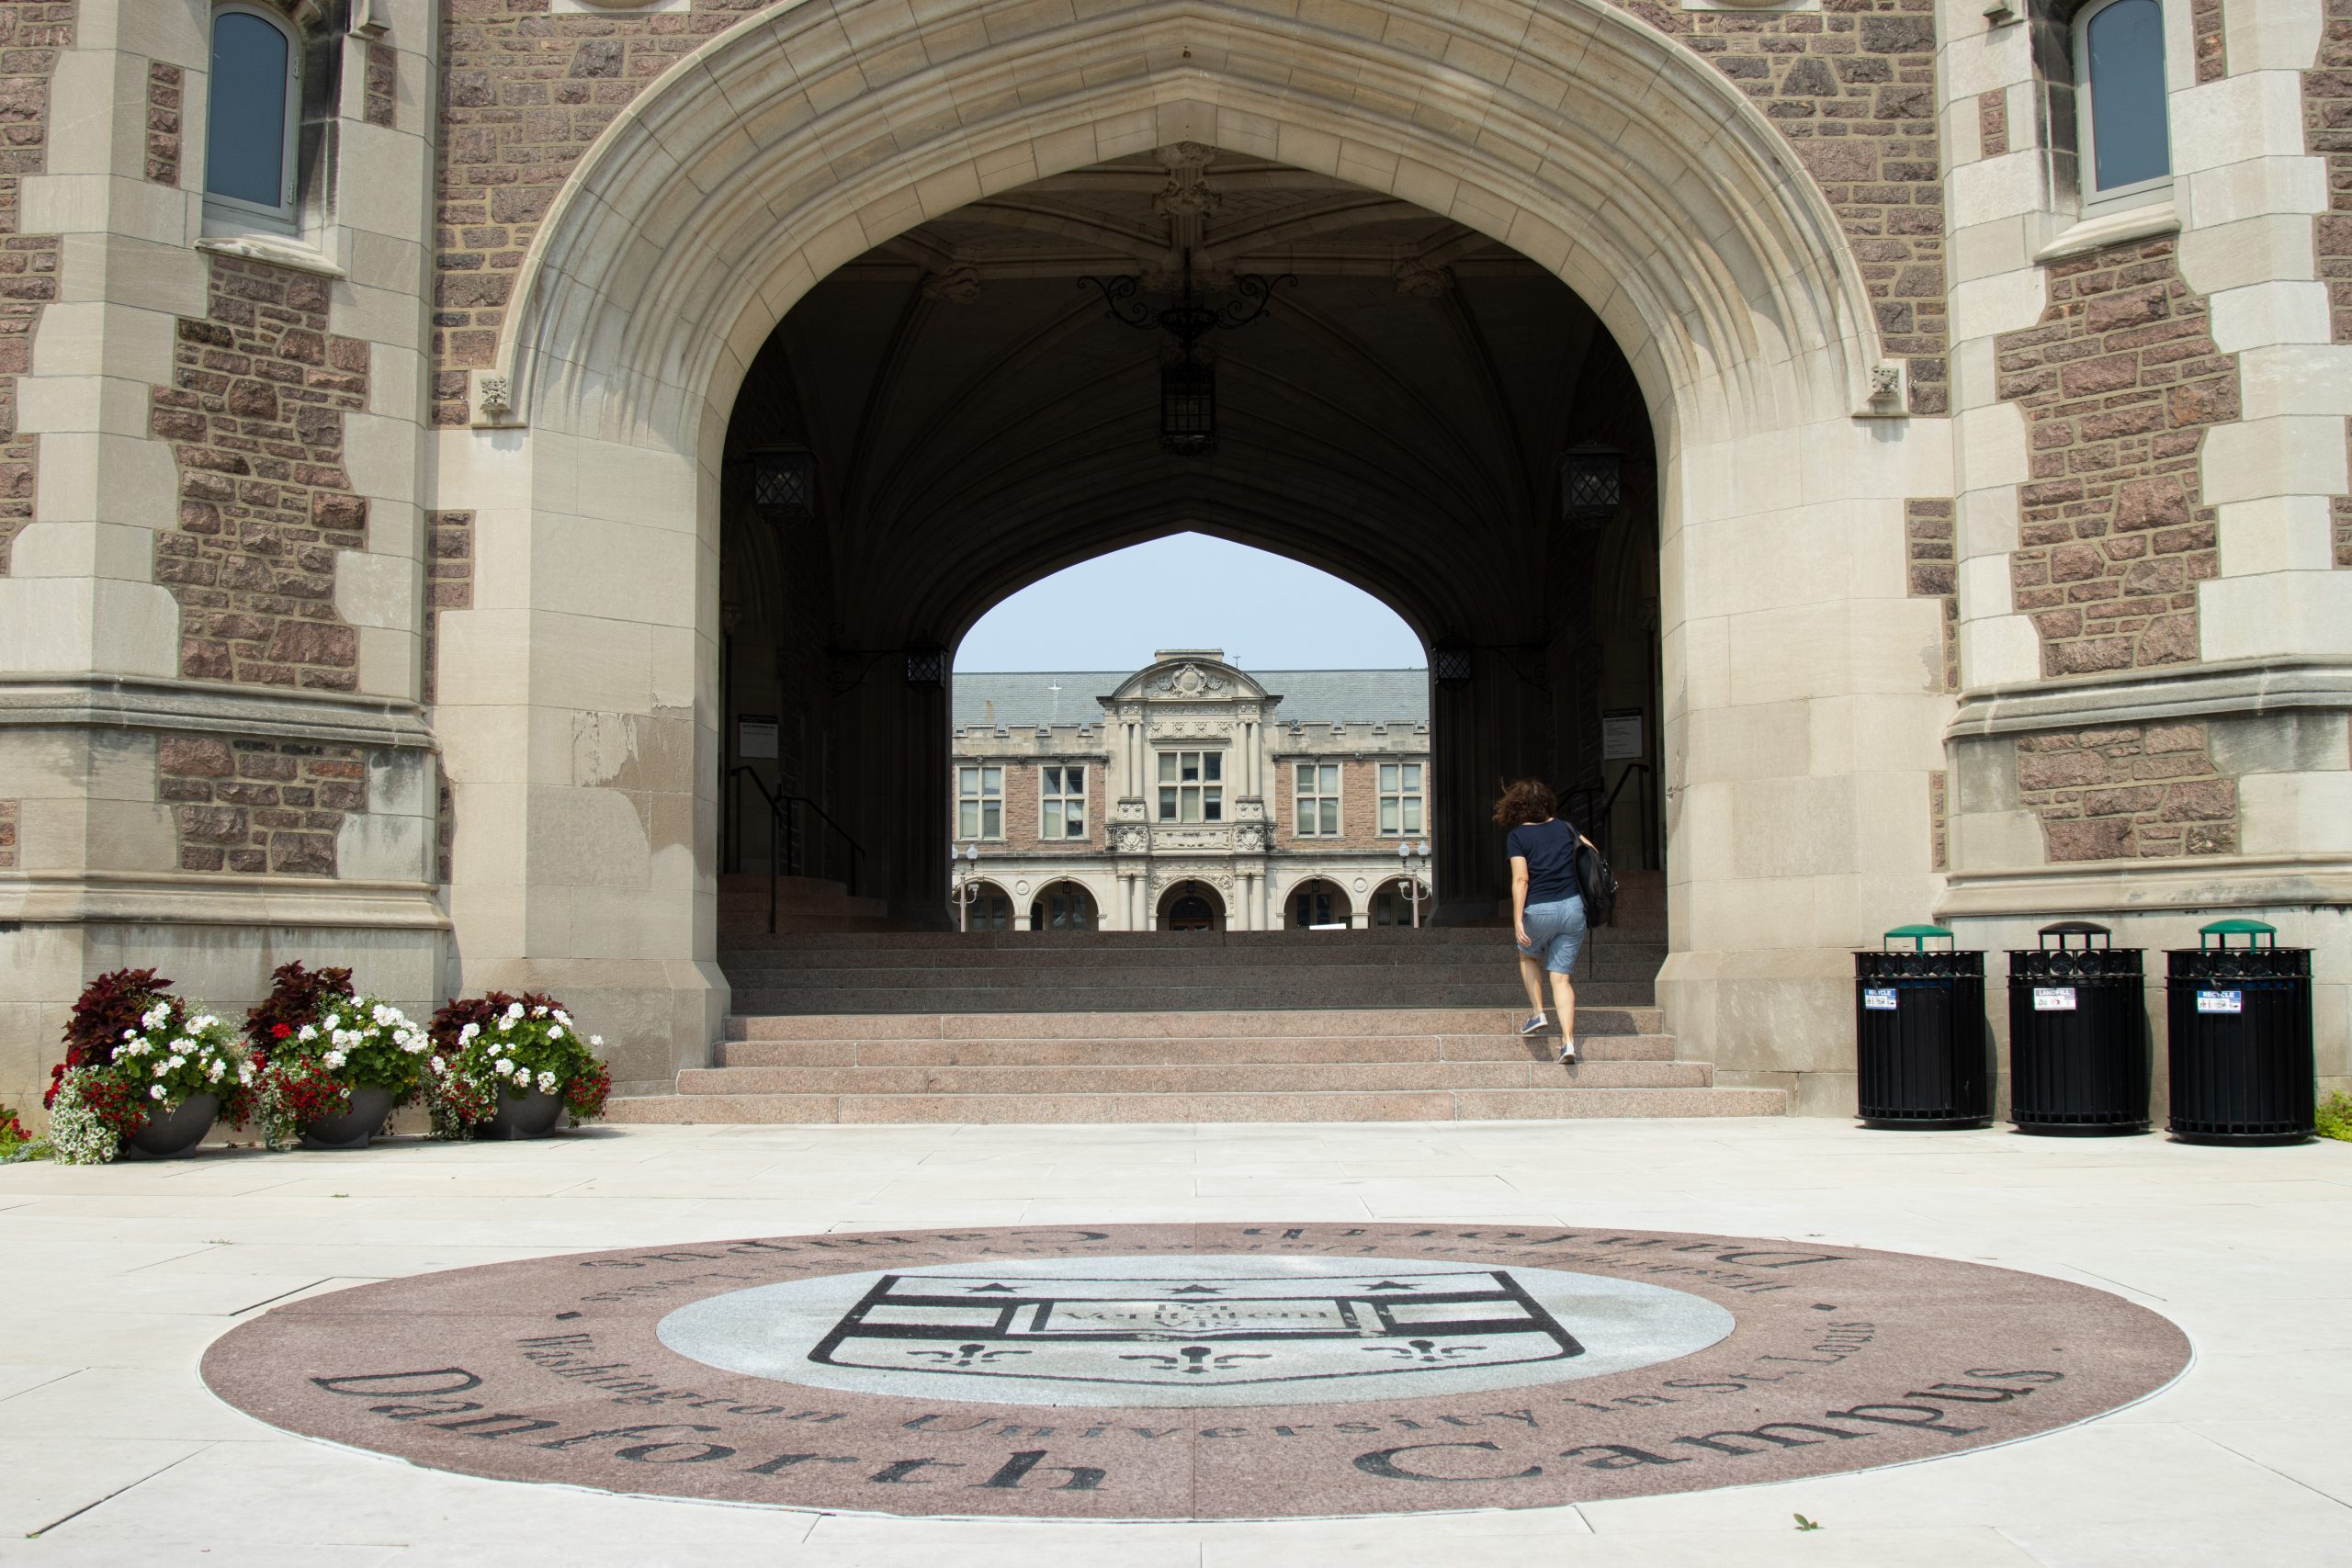 The Washington University seal sits in front of stairs leading under an arch. A person walks up the right side of the stairs.